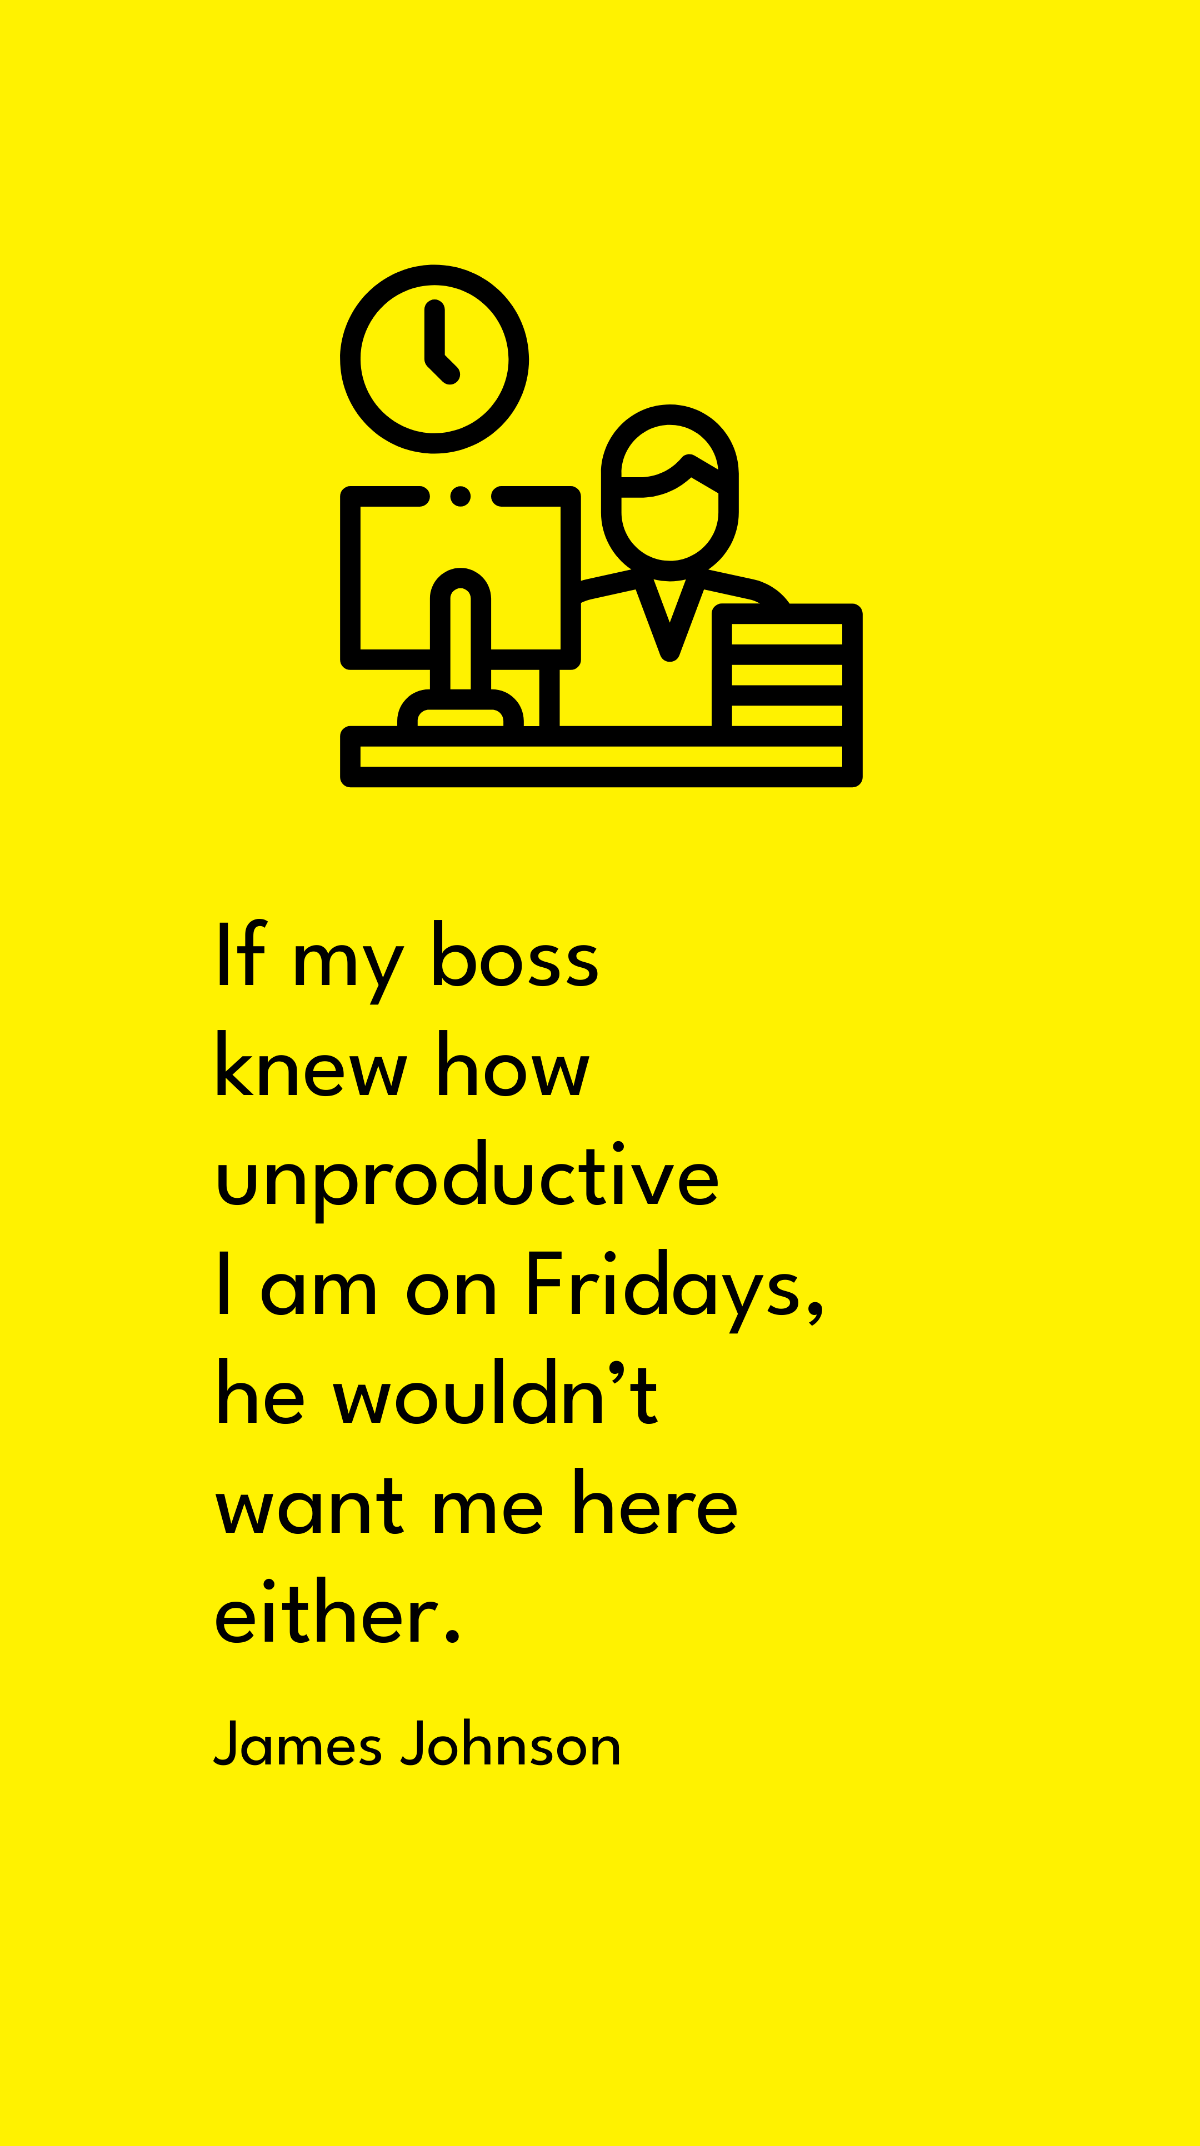 James Johnson - If my boss knew how unproductive I am on Fridays, he wouldn’t want me here either.  Template